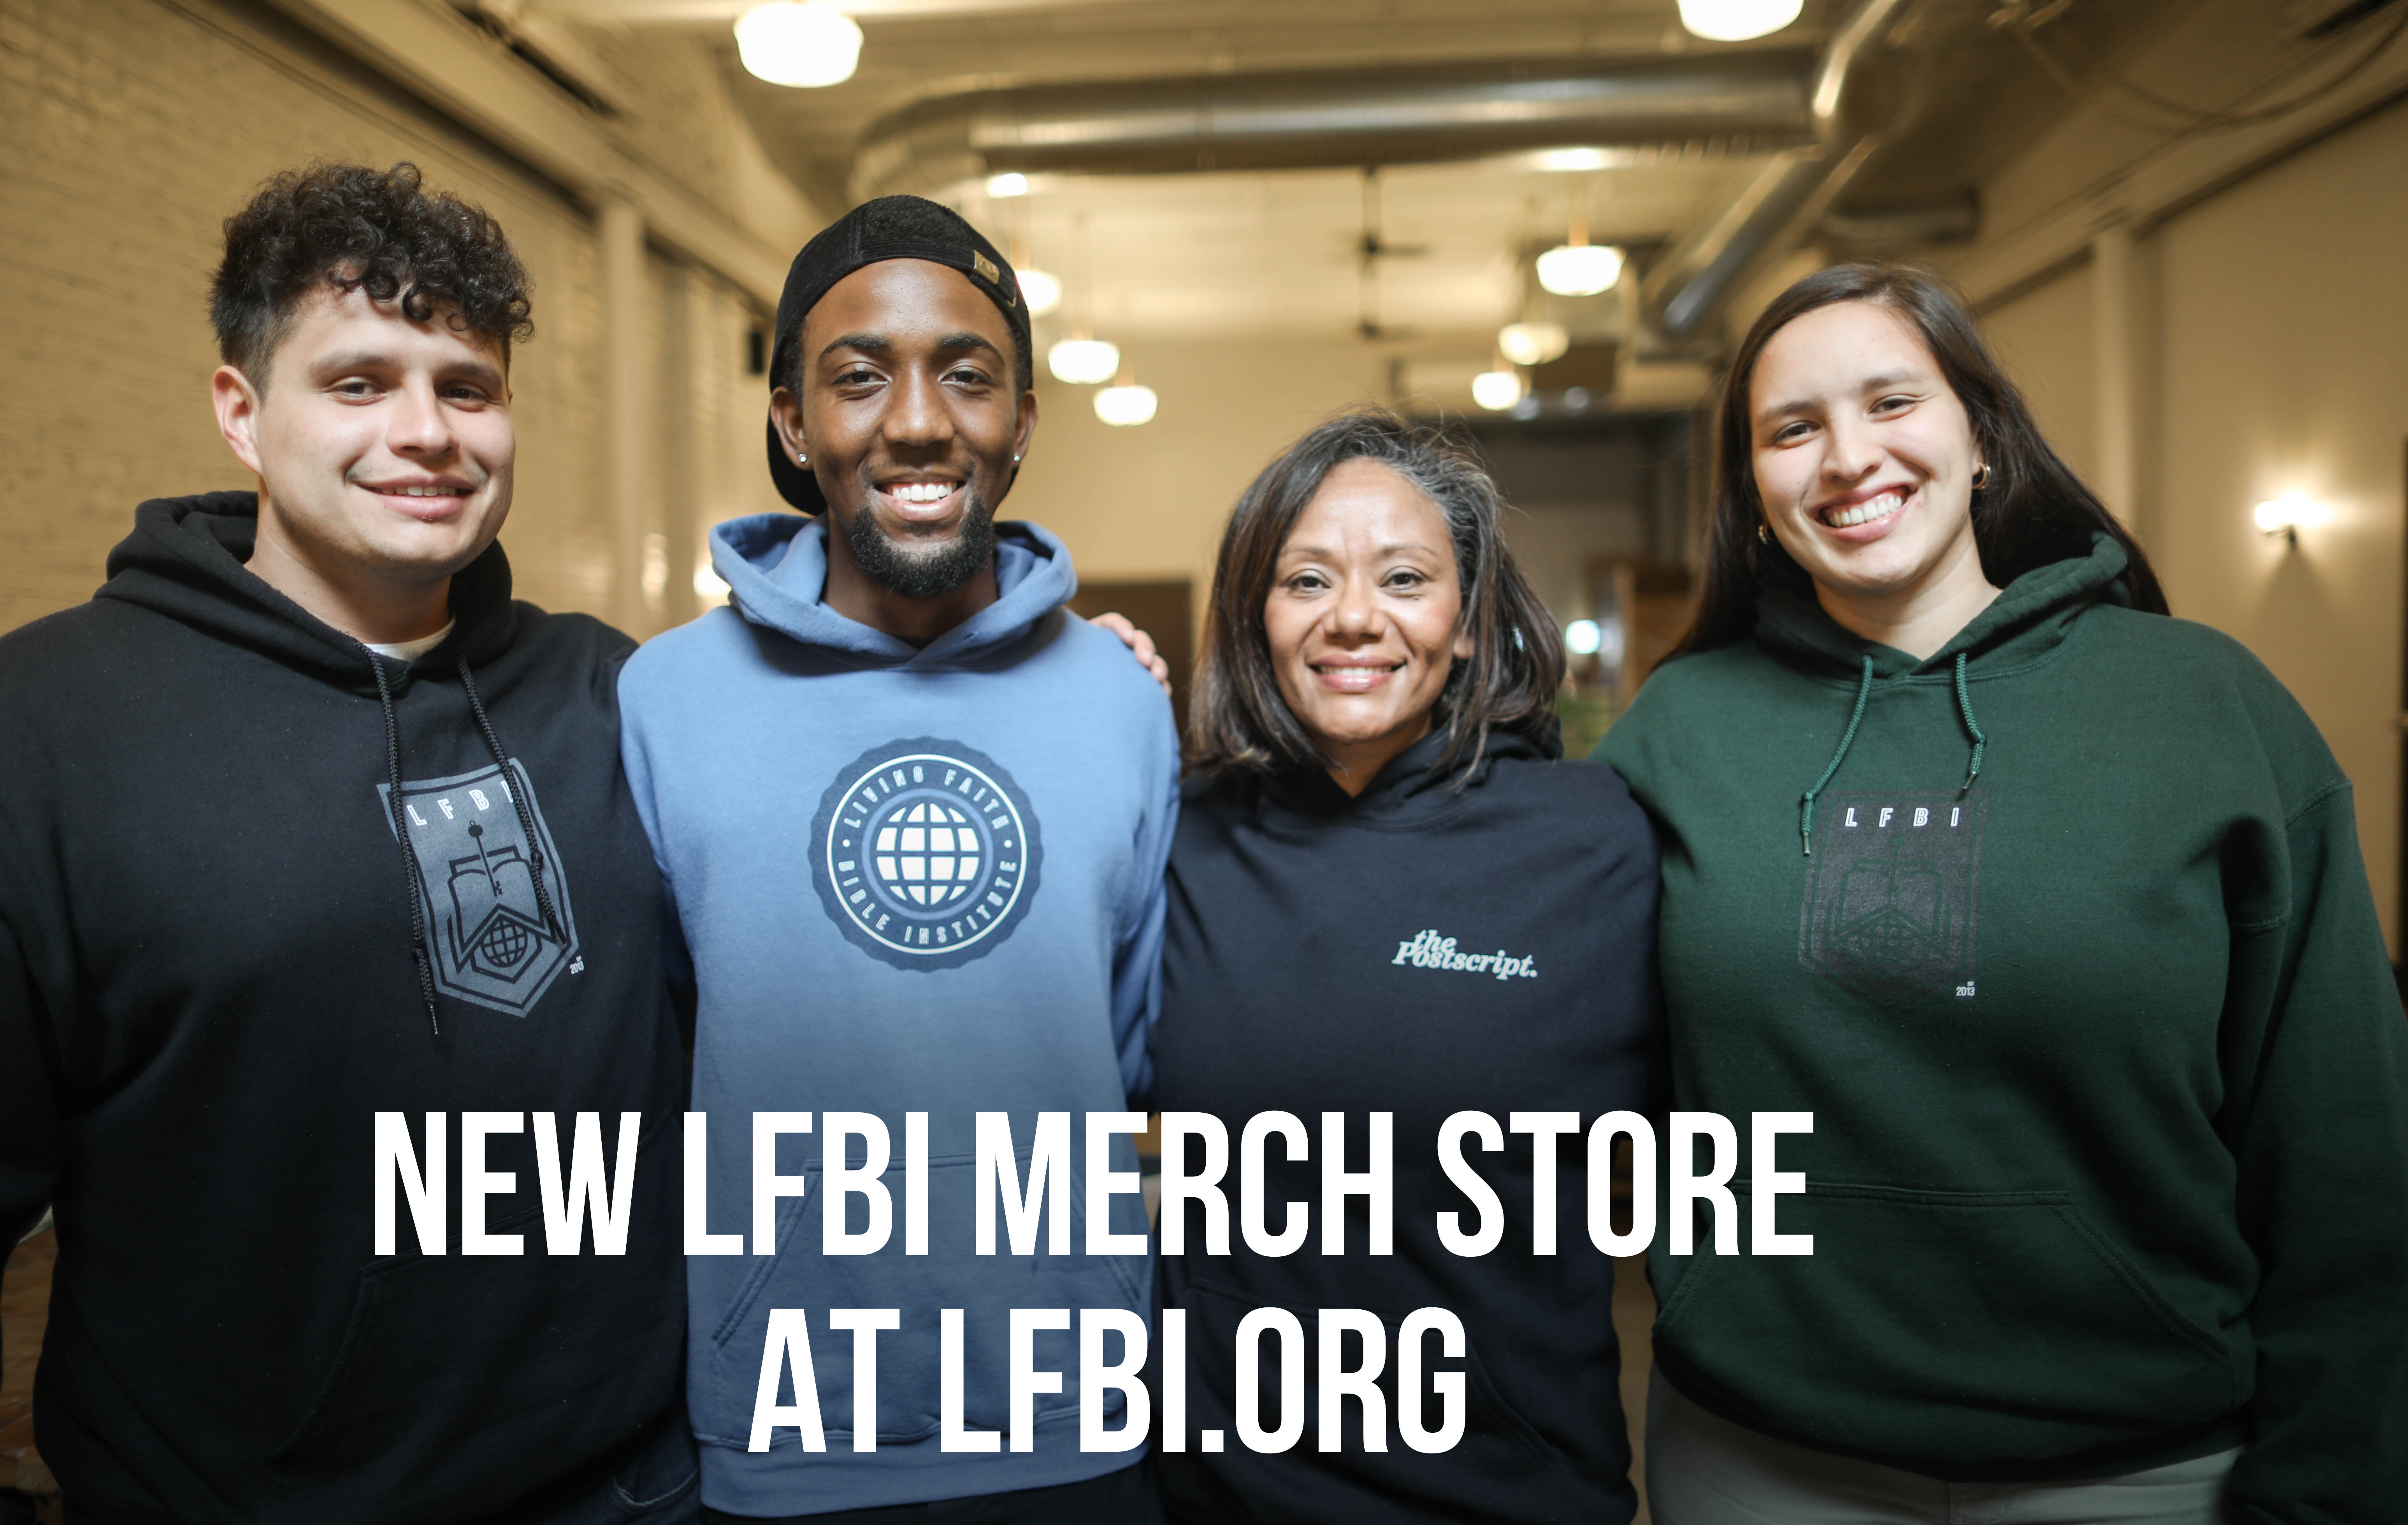 this is an image of students wearing LFBI merchandise